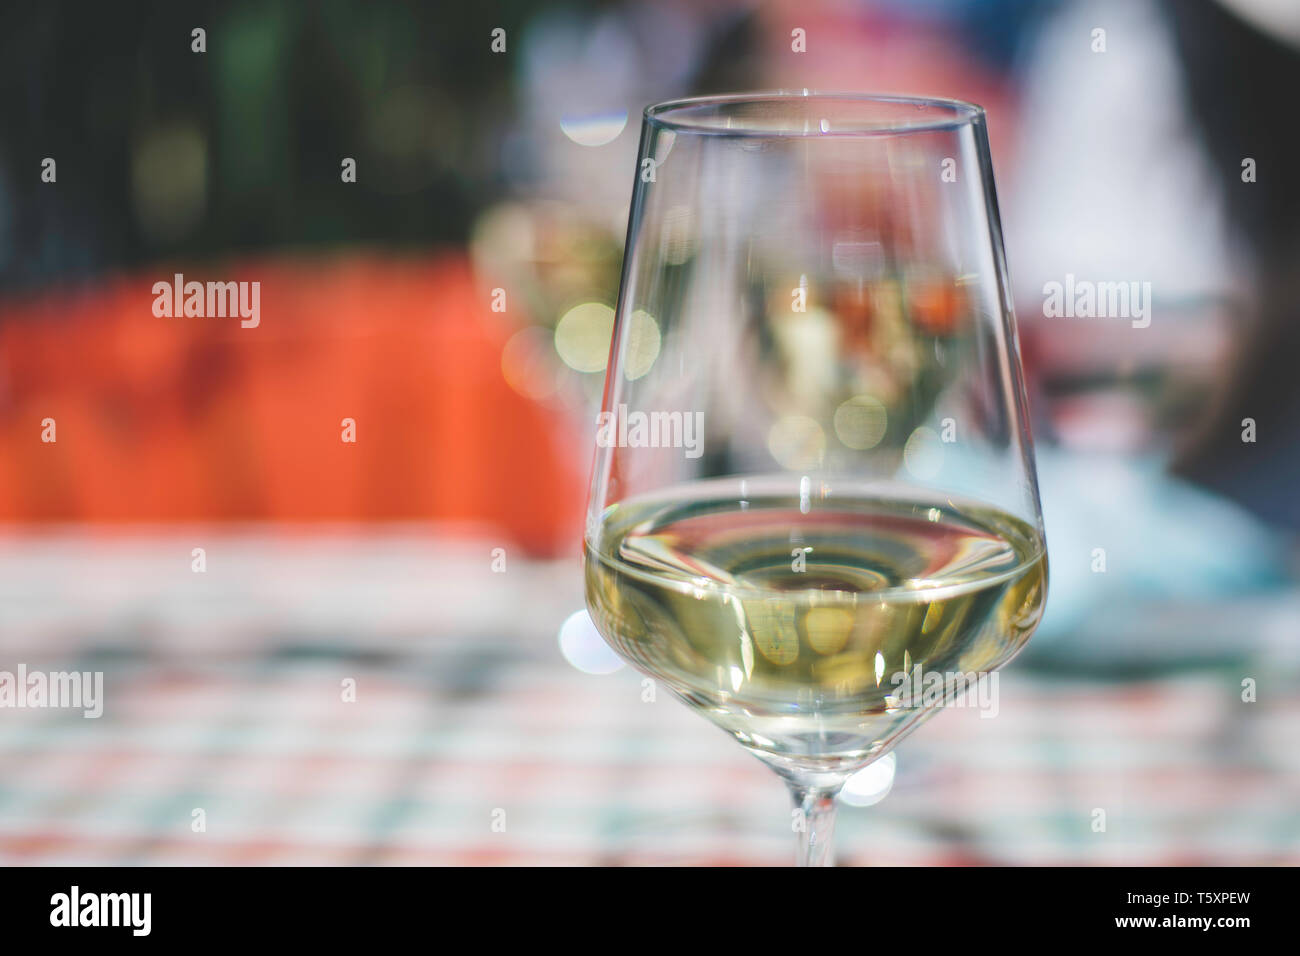 a glass of white wine on the table Stock Photo